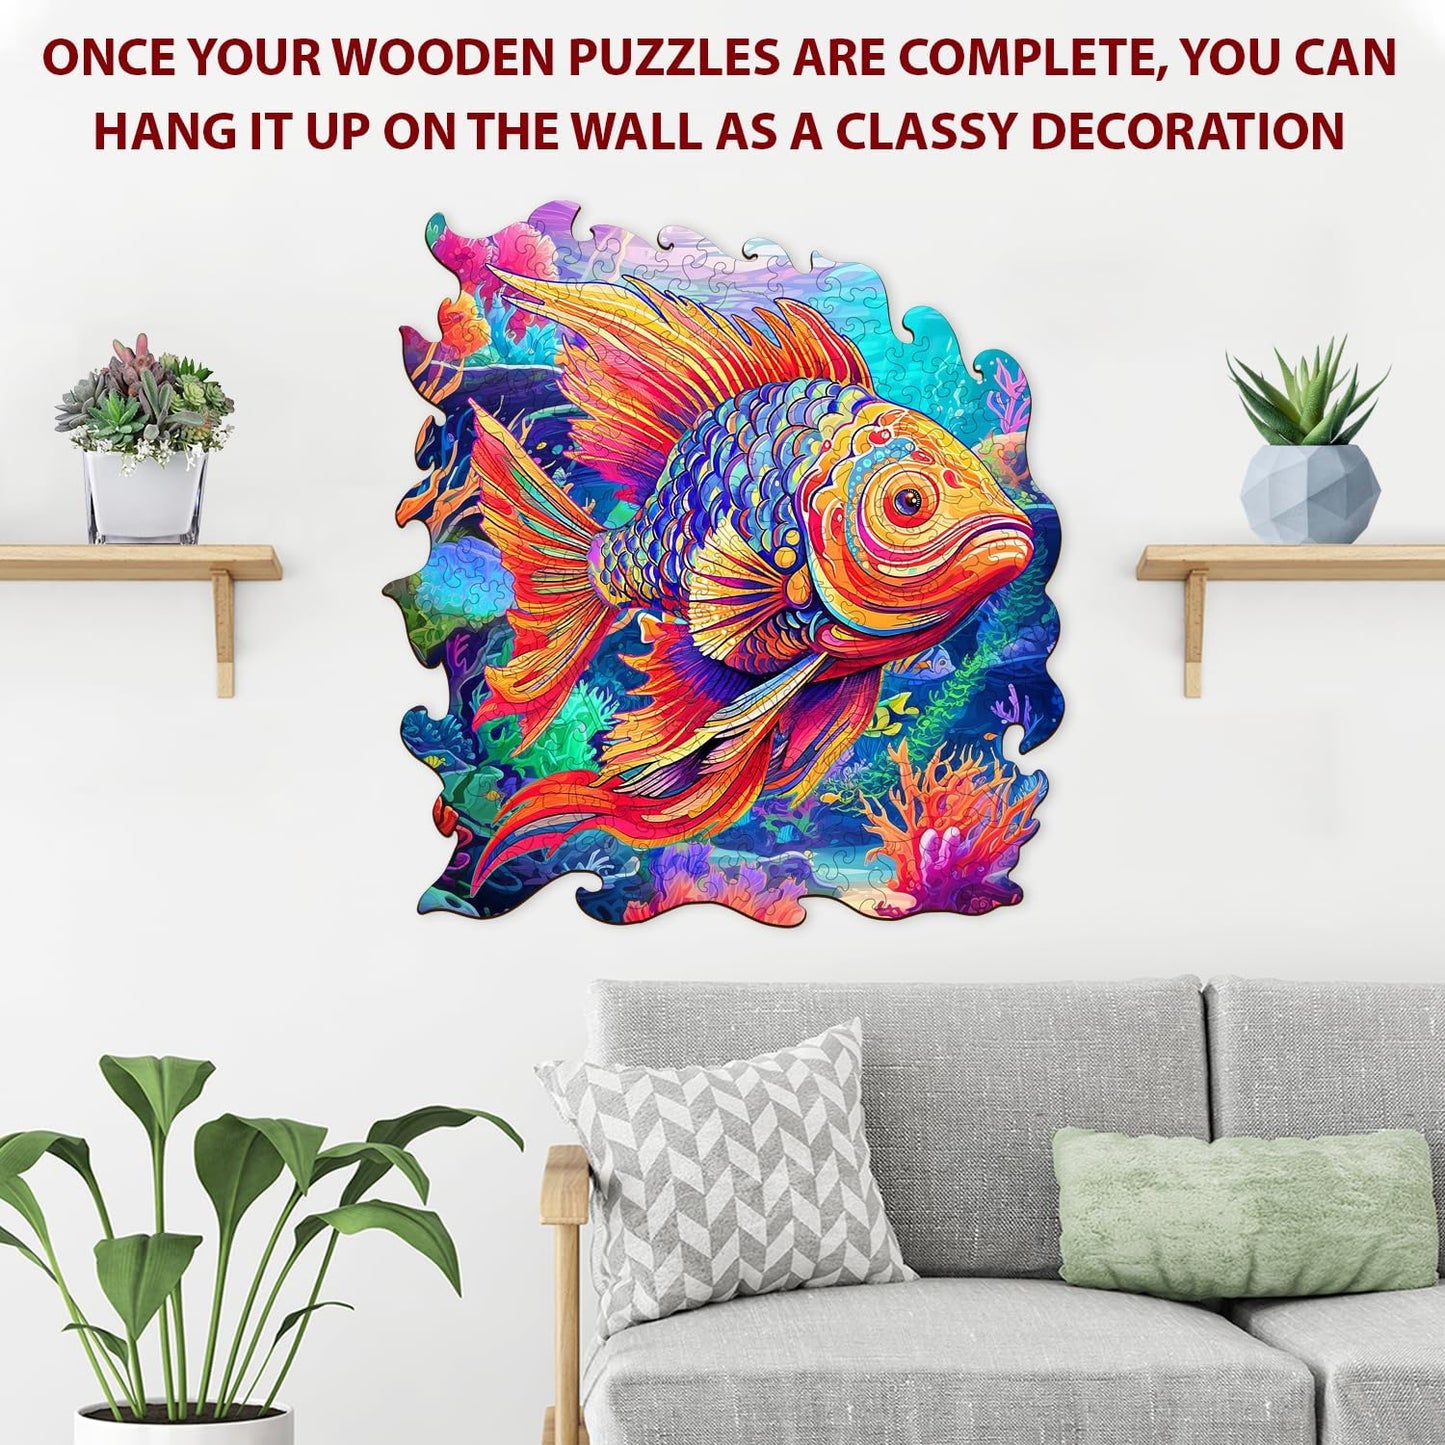 Fish wooden jigsaw puzzles